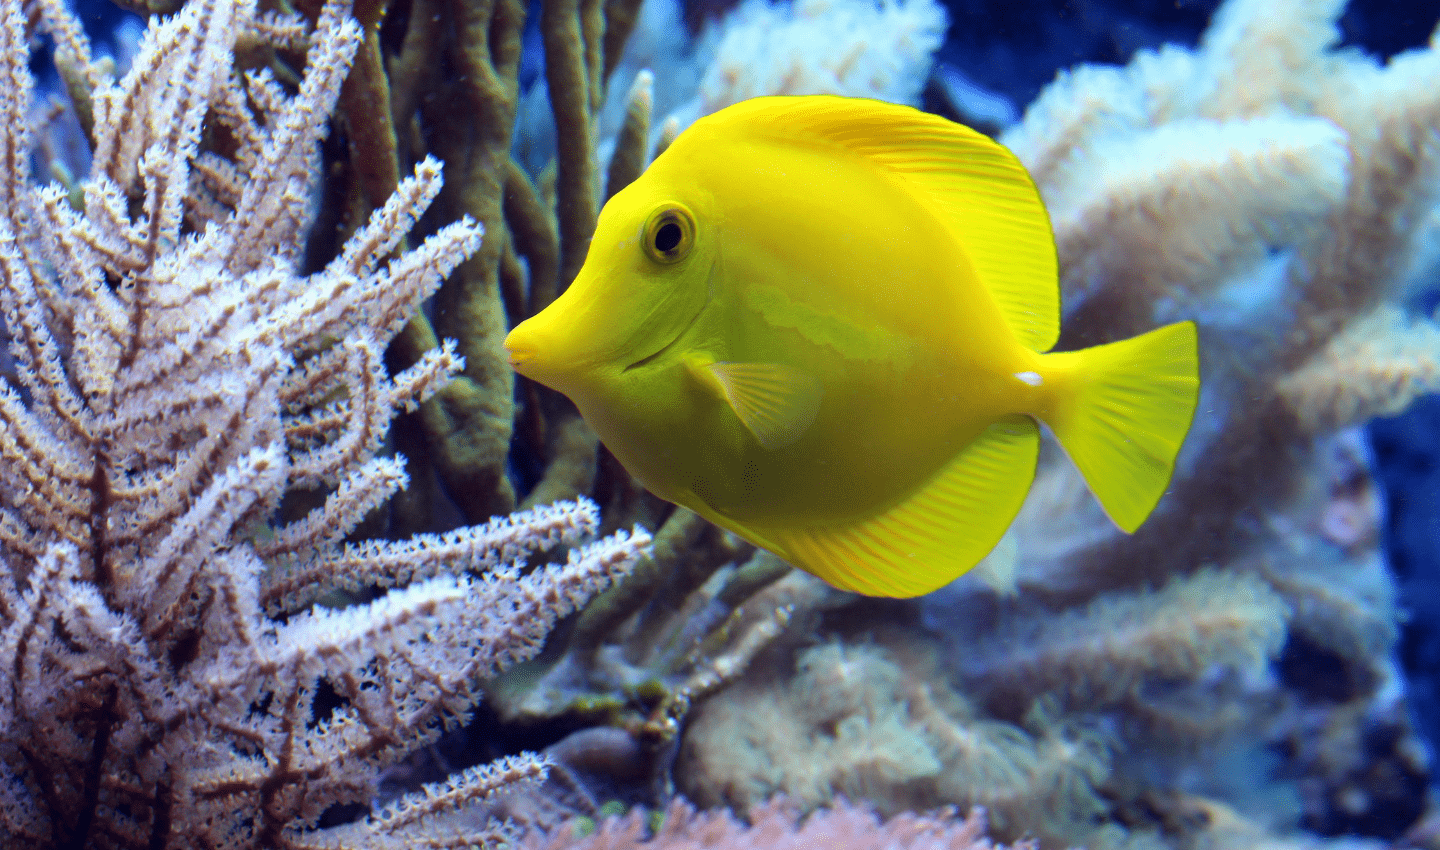 Bright yellow fish next o a coral reef. Shared by Ocean Generation in an article about interesting coral reef facts.